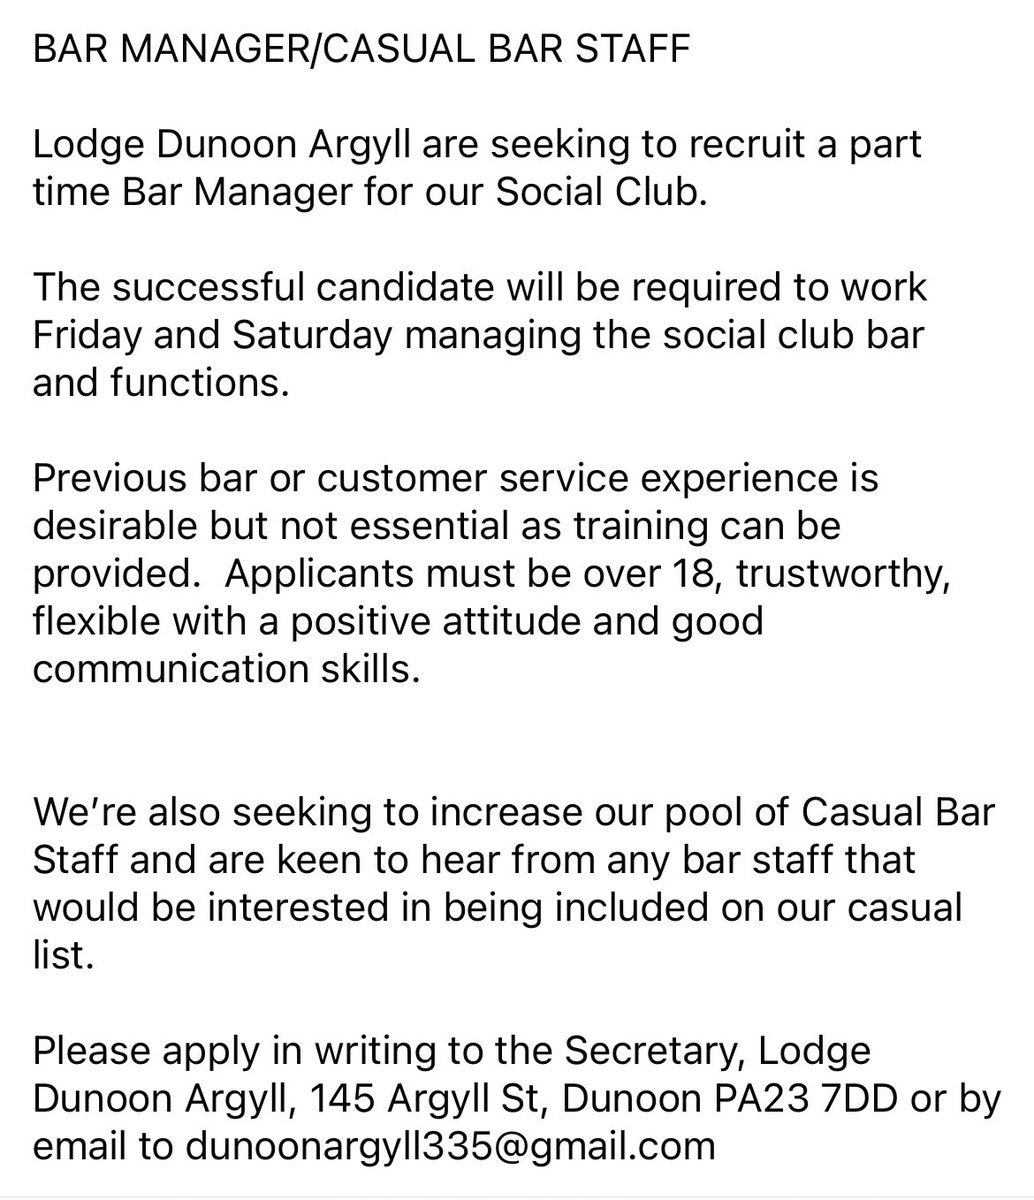 We’re looking for staff to work in our social club. Please click image to see full advert.

#jobvacancy #staffwanted #Dunoon